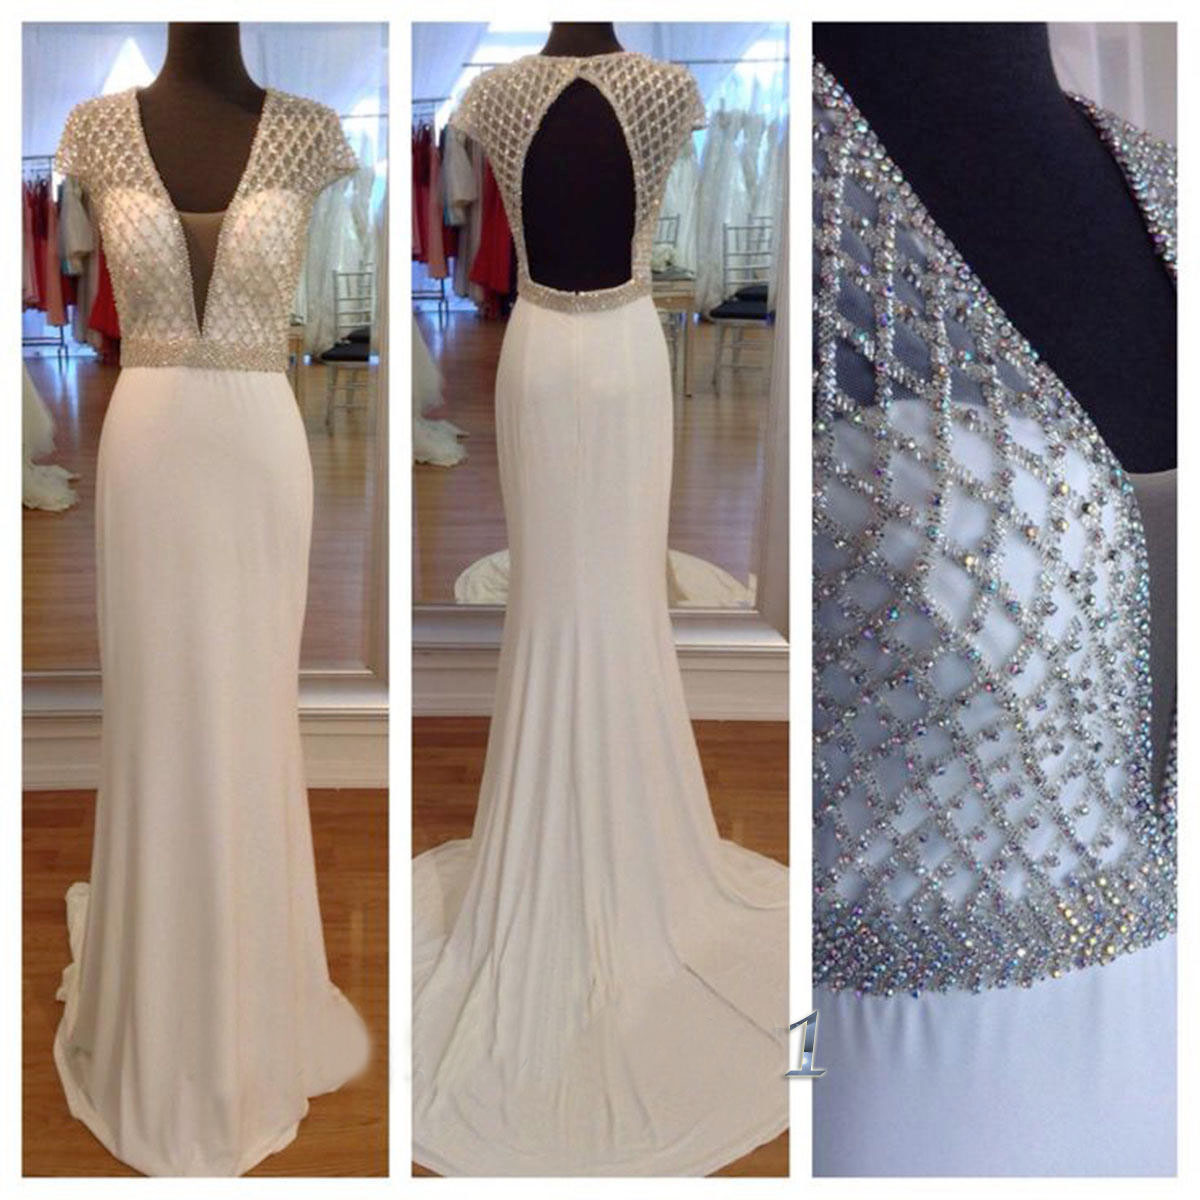 White Deep V Neck Prom Dresses,backless Mermaid Evening Dresses,charming Beaded Sheath Long Prom Gown,cap Sleeves Evening Gowns 2016